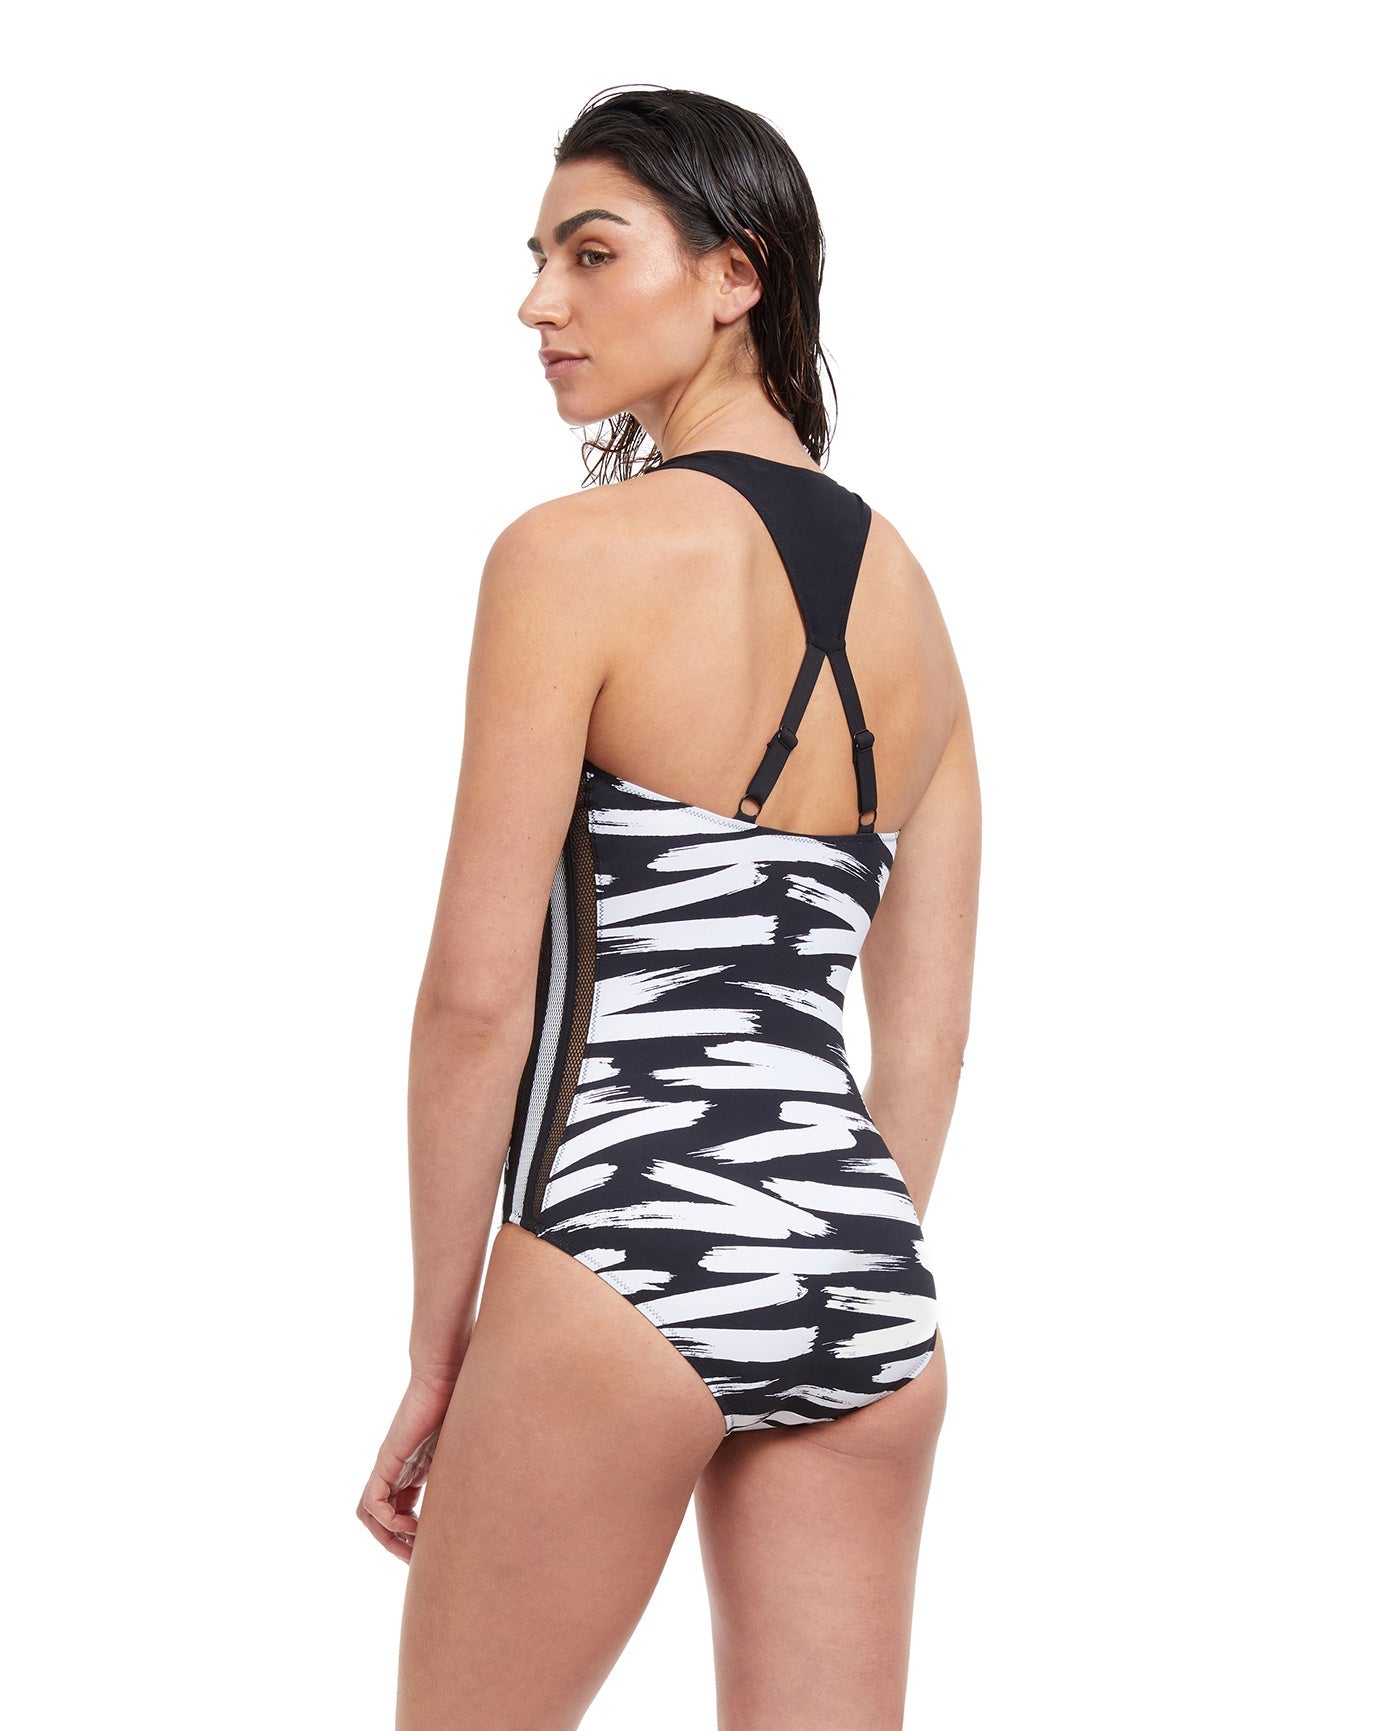 Back View Of Free Sport Upstream Round Neck Y-Back One Piece Swimsuit | FREE SPORT UPSTREAM BLACK AND WHITE